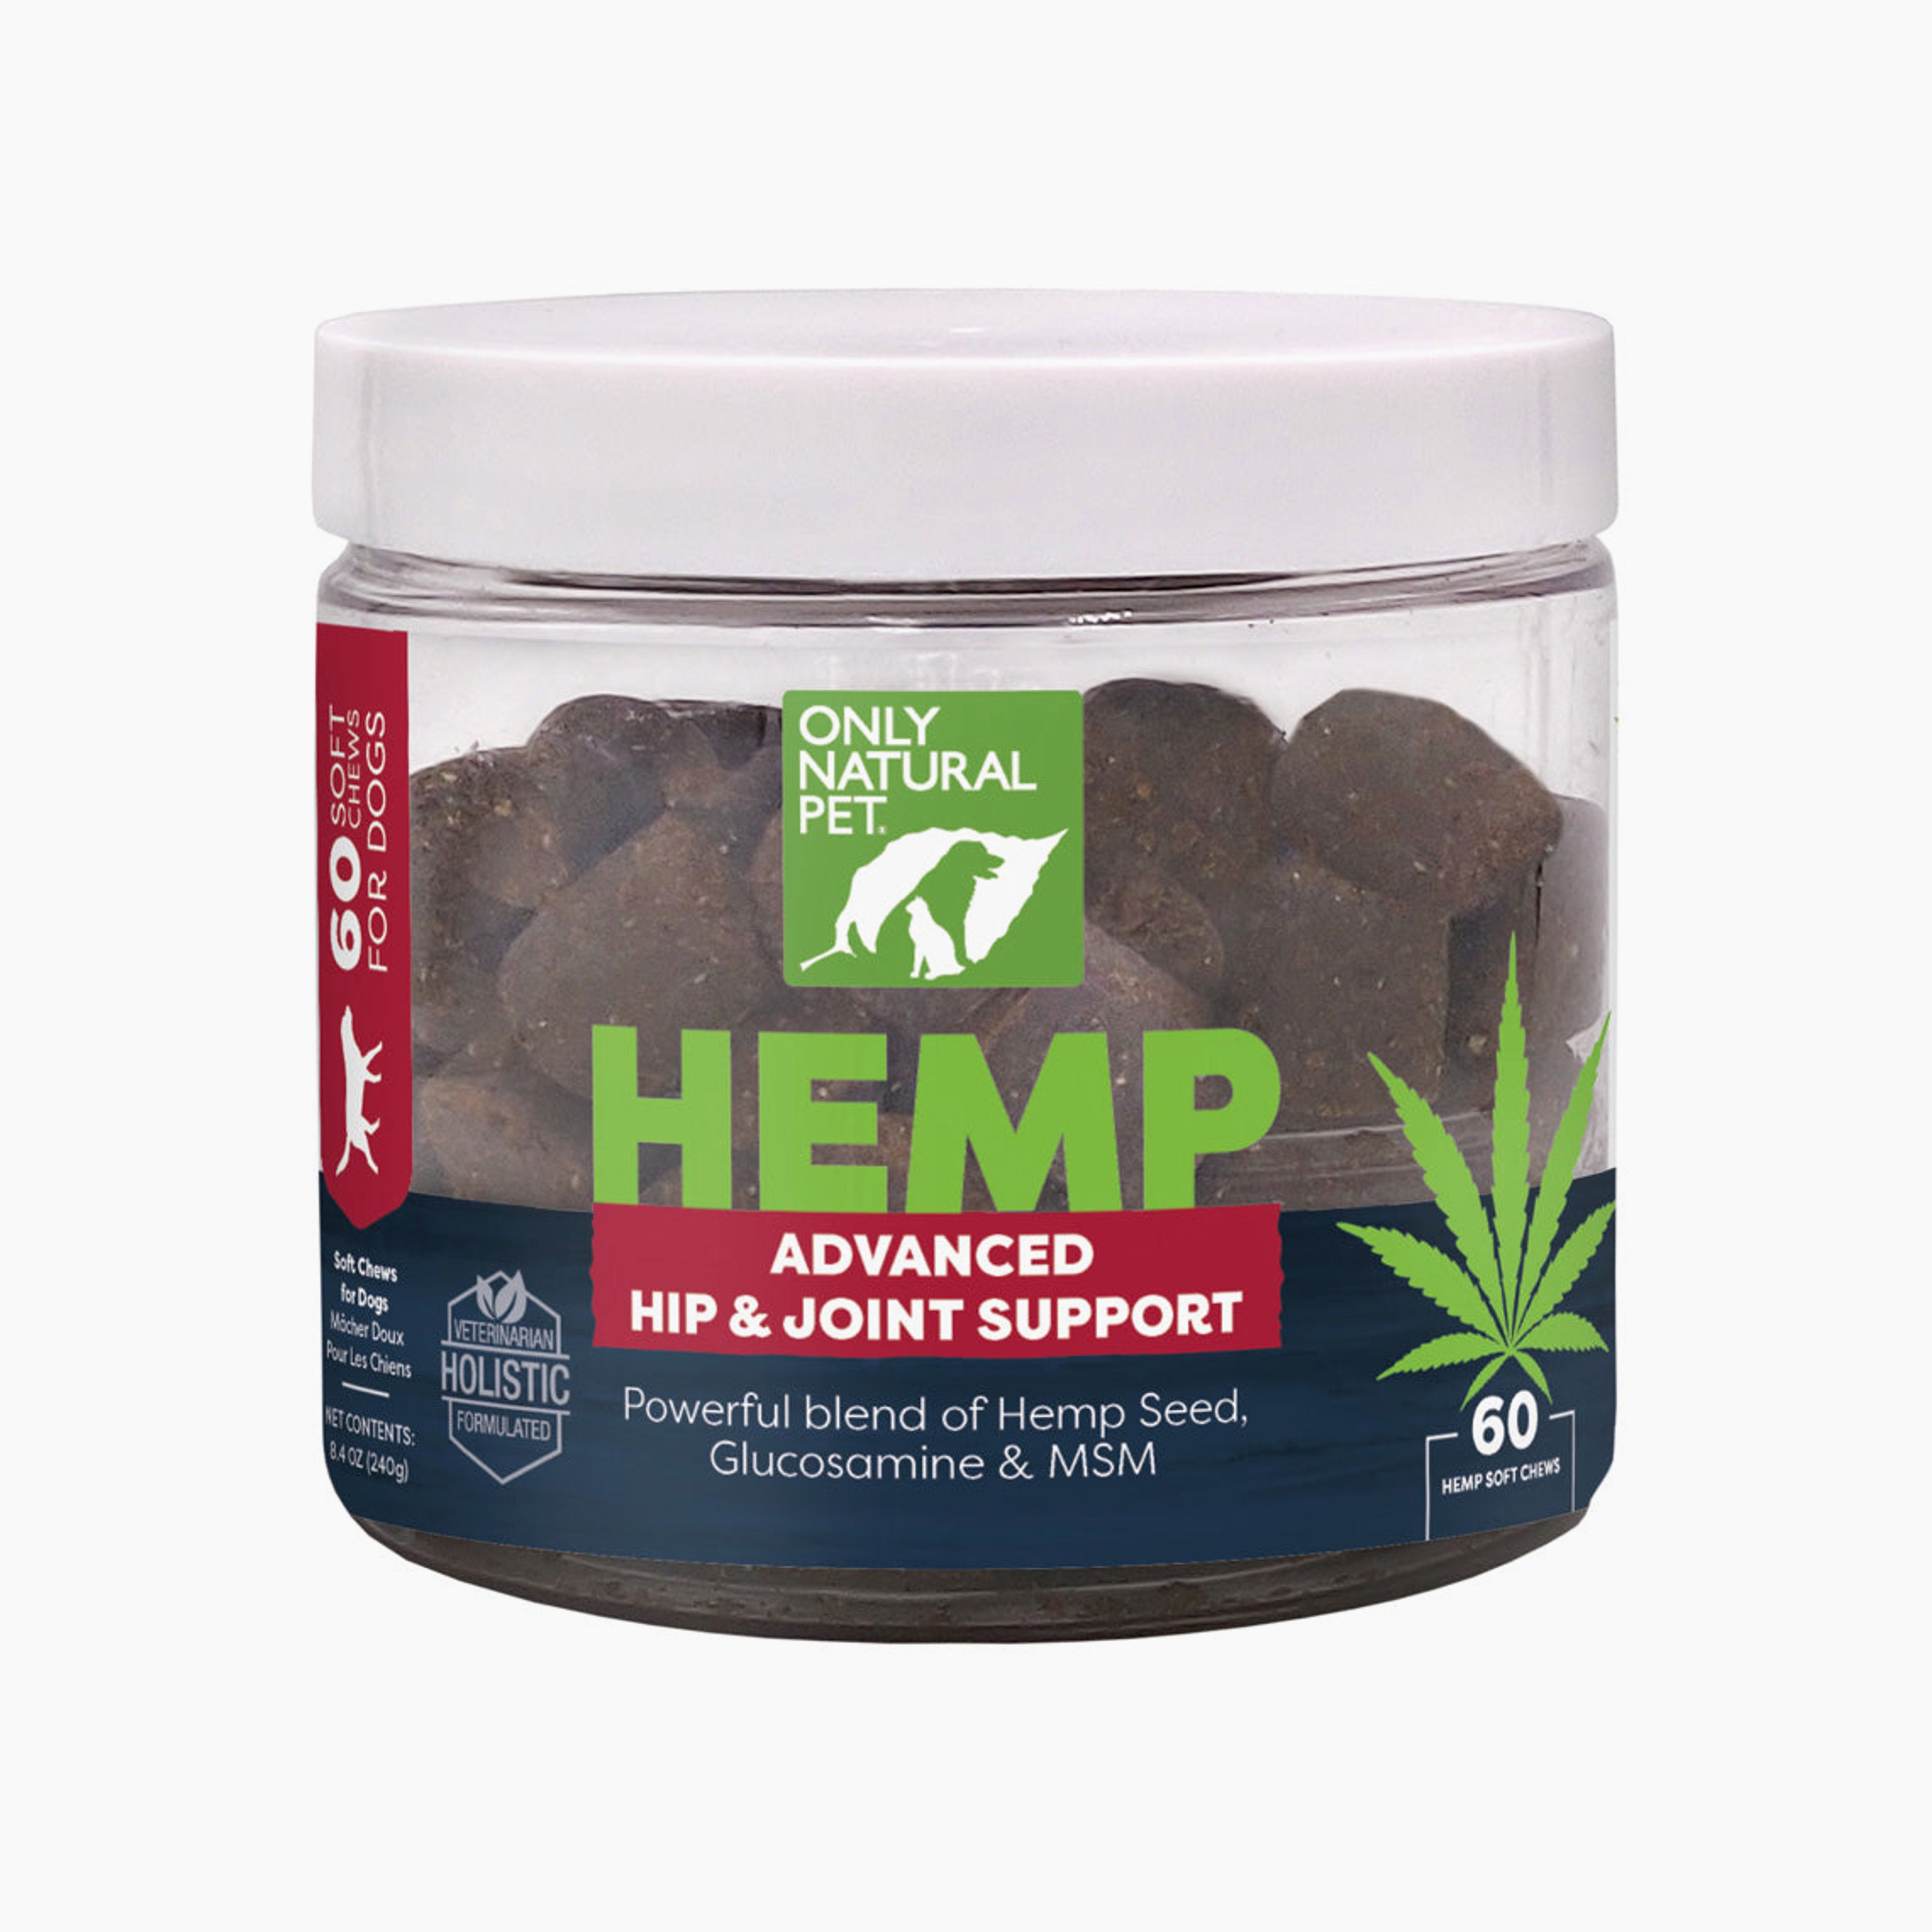 Only Natural Pet Hemp Advanced Hip & Joint Supplement for Dogs